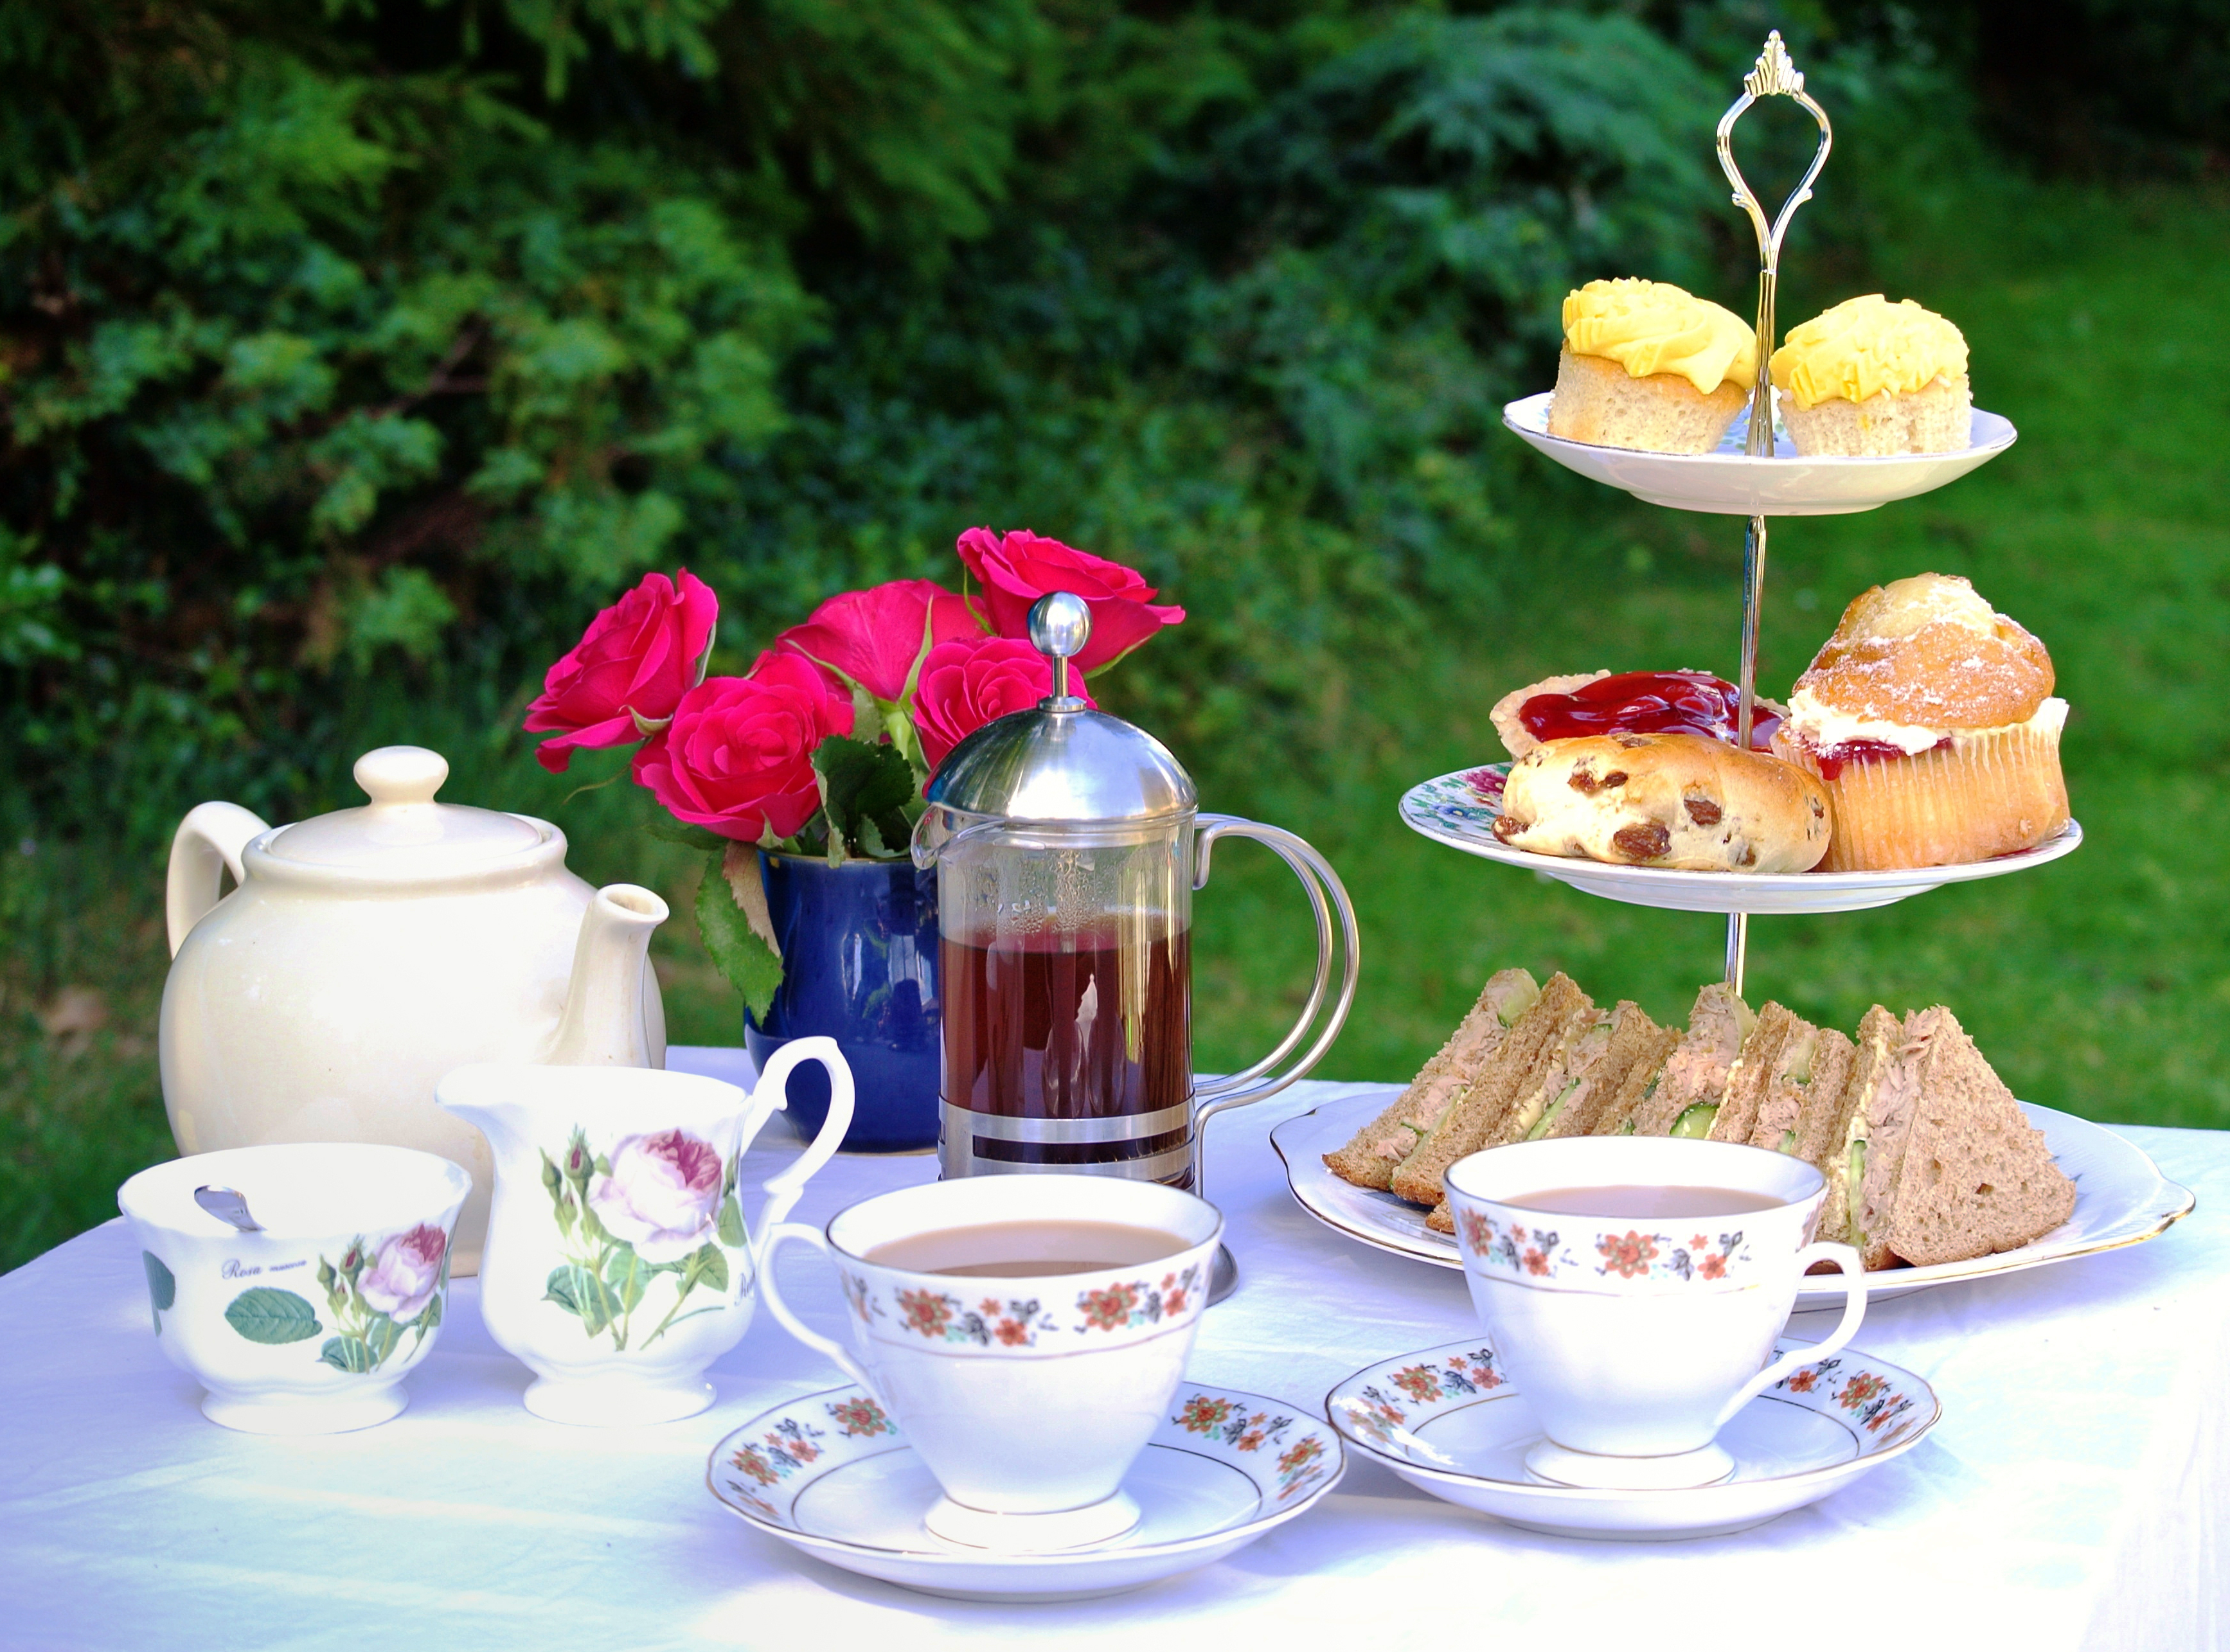 Sweet treats for an afternoon tea party | Food & Home Magazine